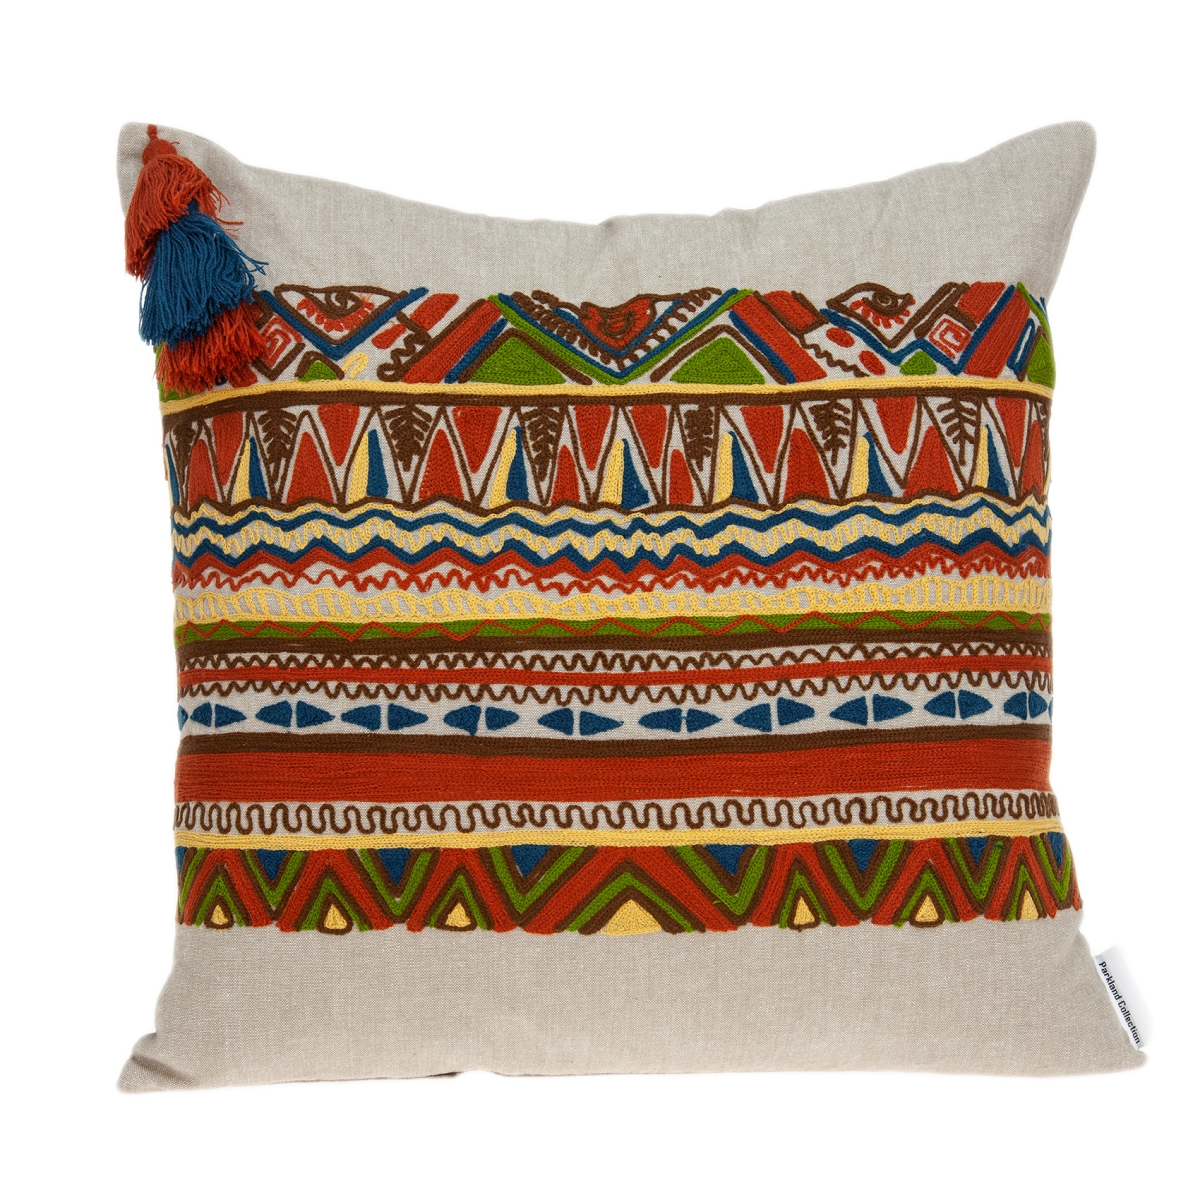 Pild11124p Zelda Multi Color Square Bohemian Pillow Cover With Poly Insert - 20 X 20 X 7 In.